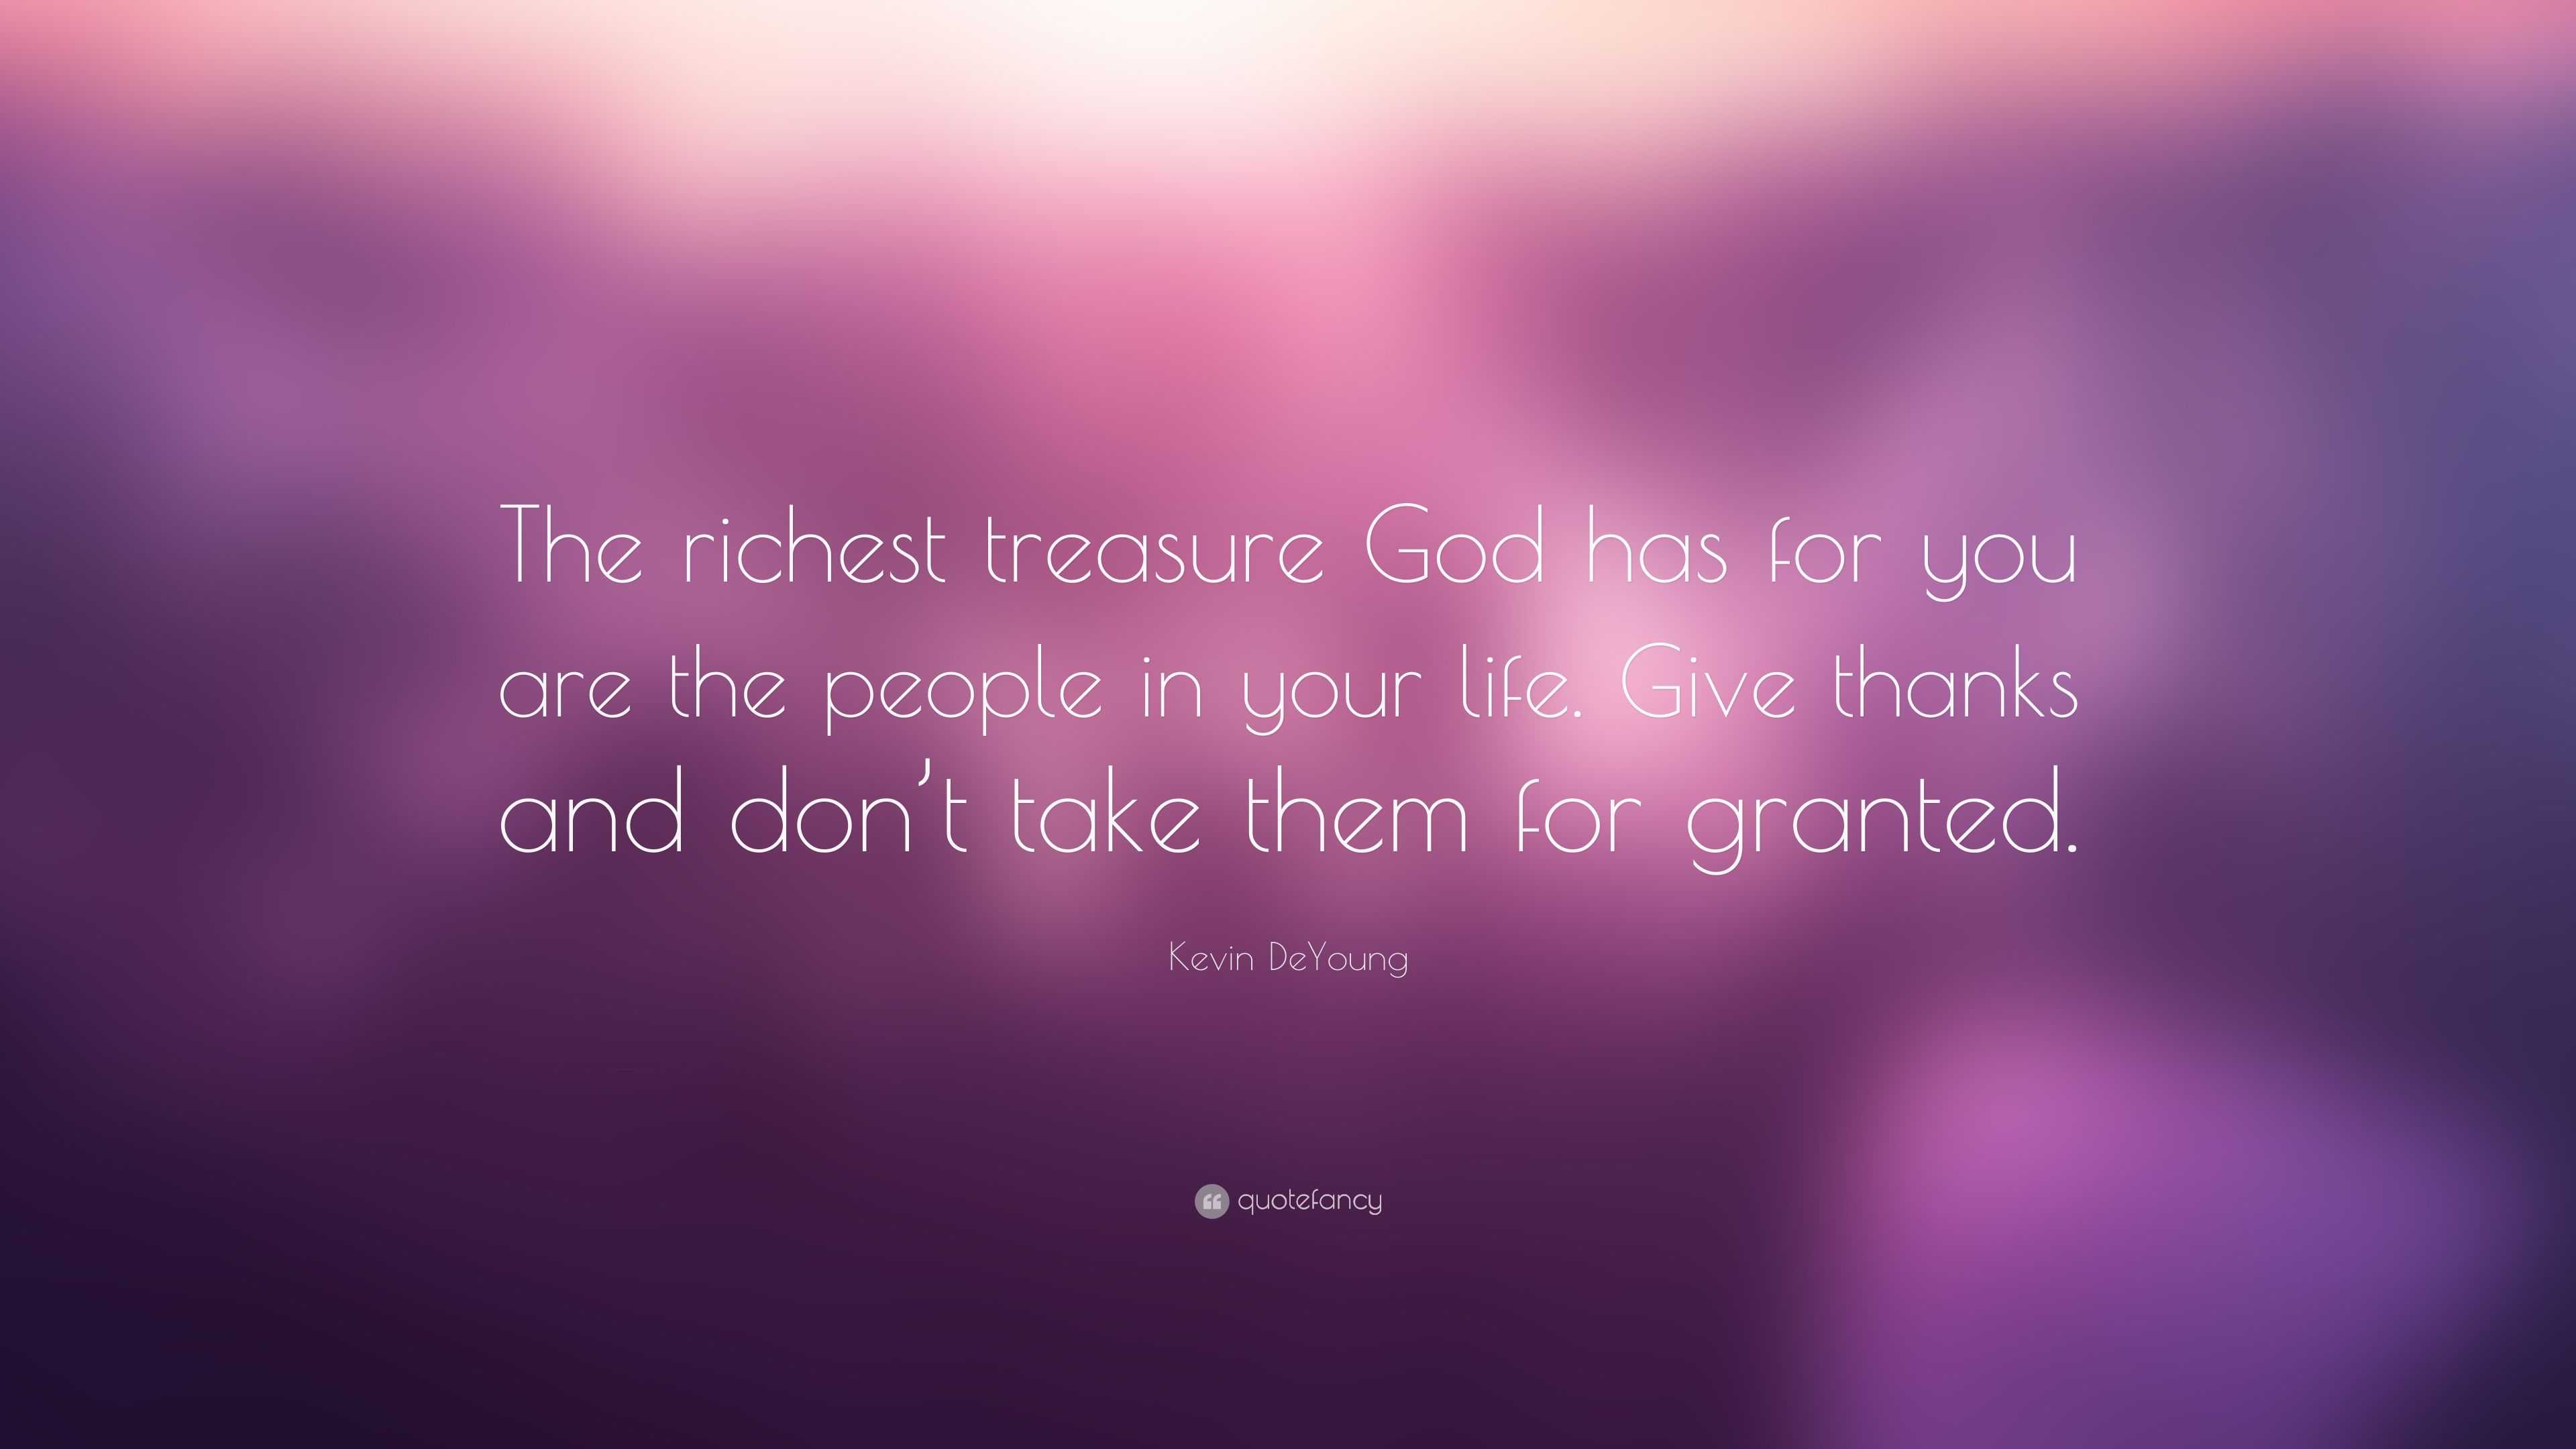 Kevin DeYoung Quote “The richest treasure God has for you are the people in